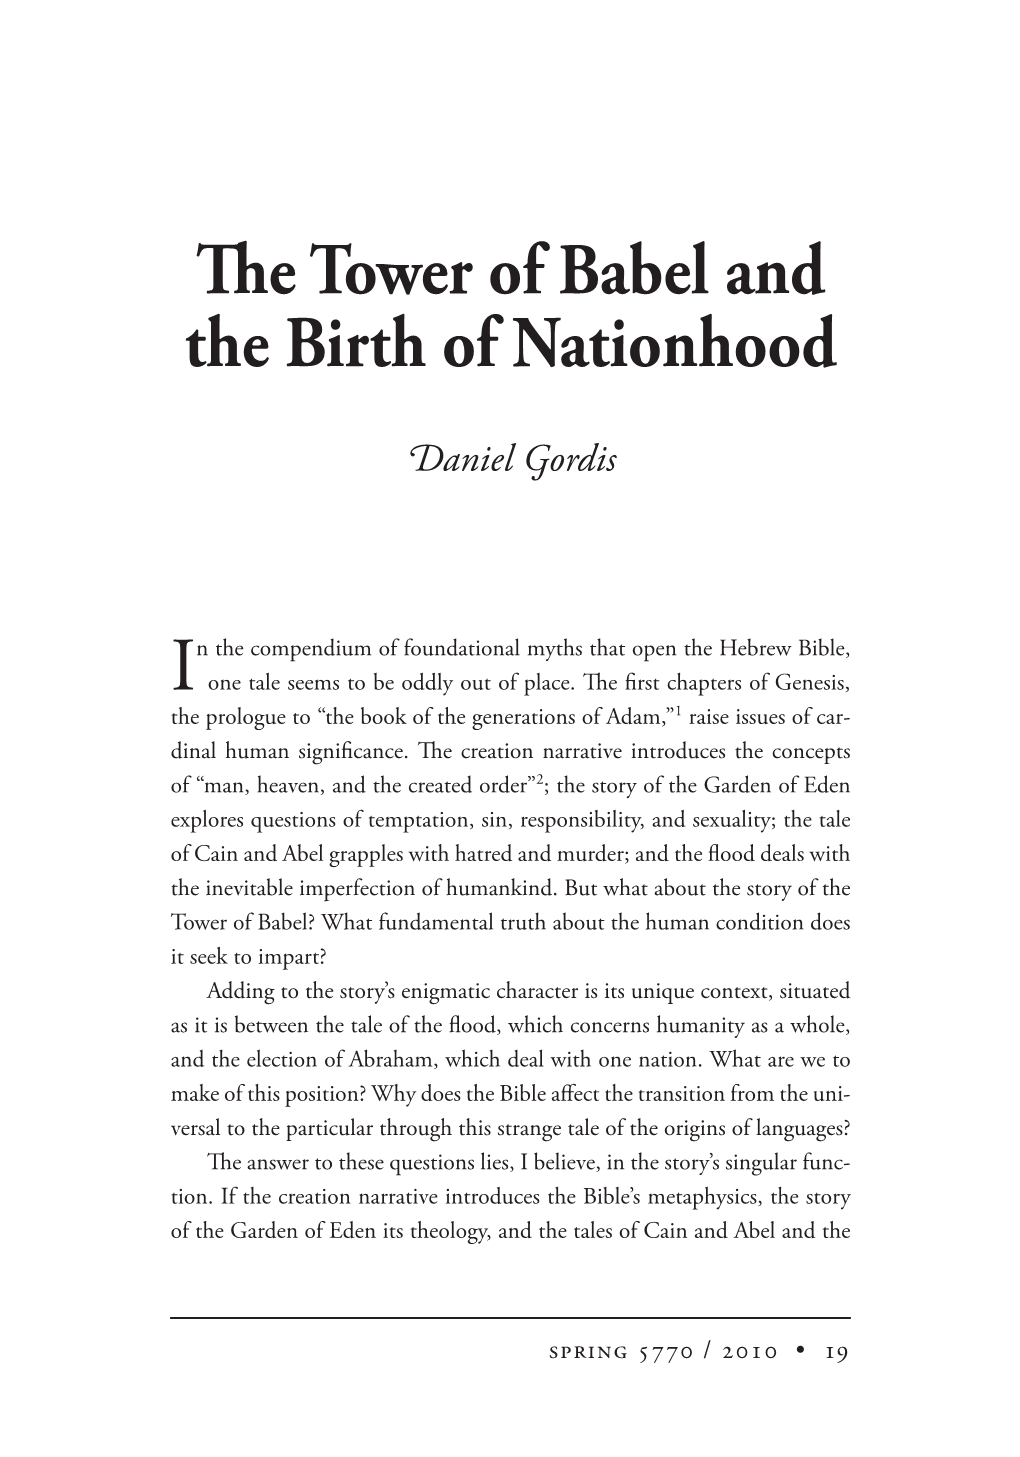 The Tower of Babel and the Birth of Nationhood